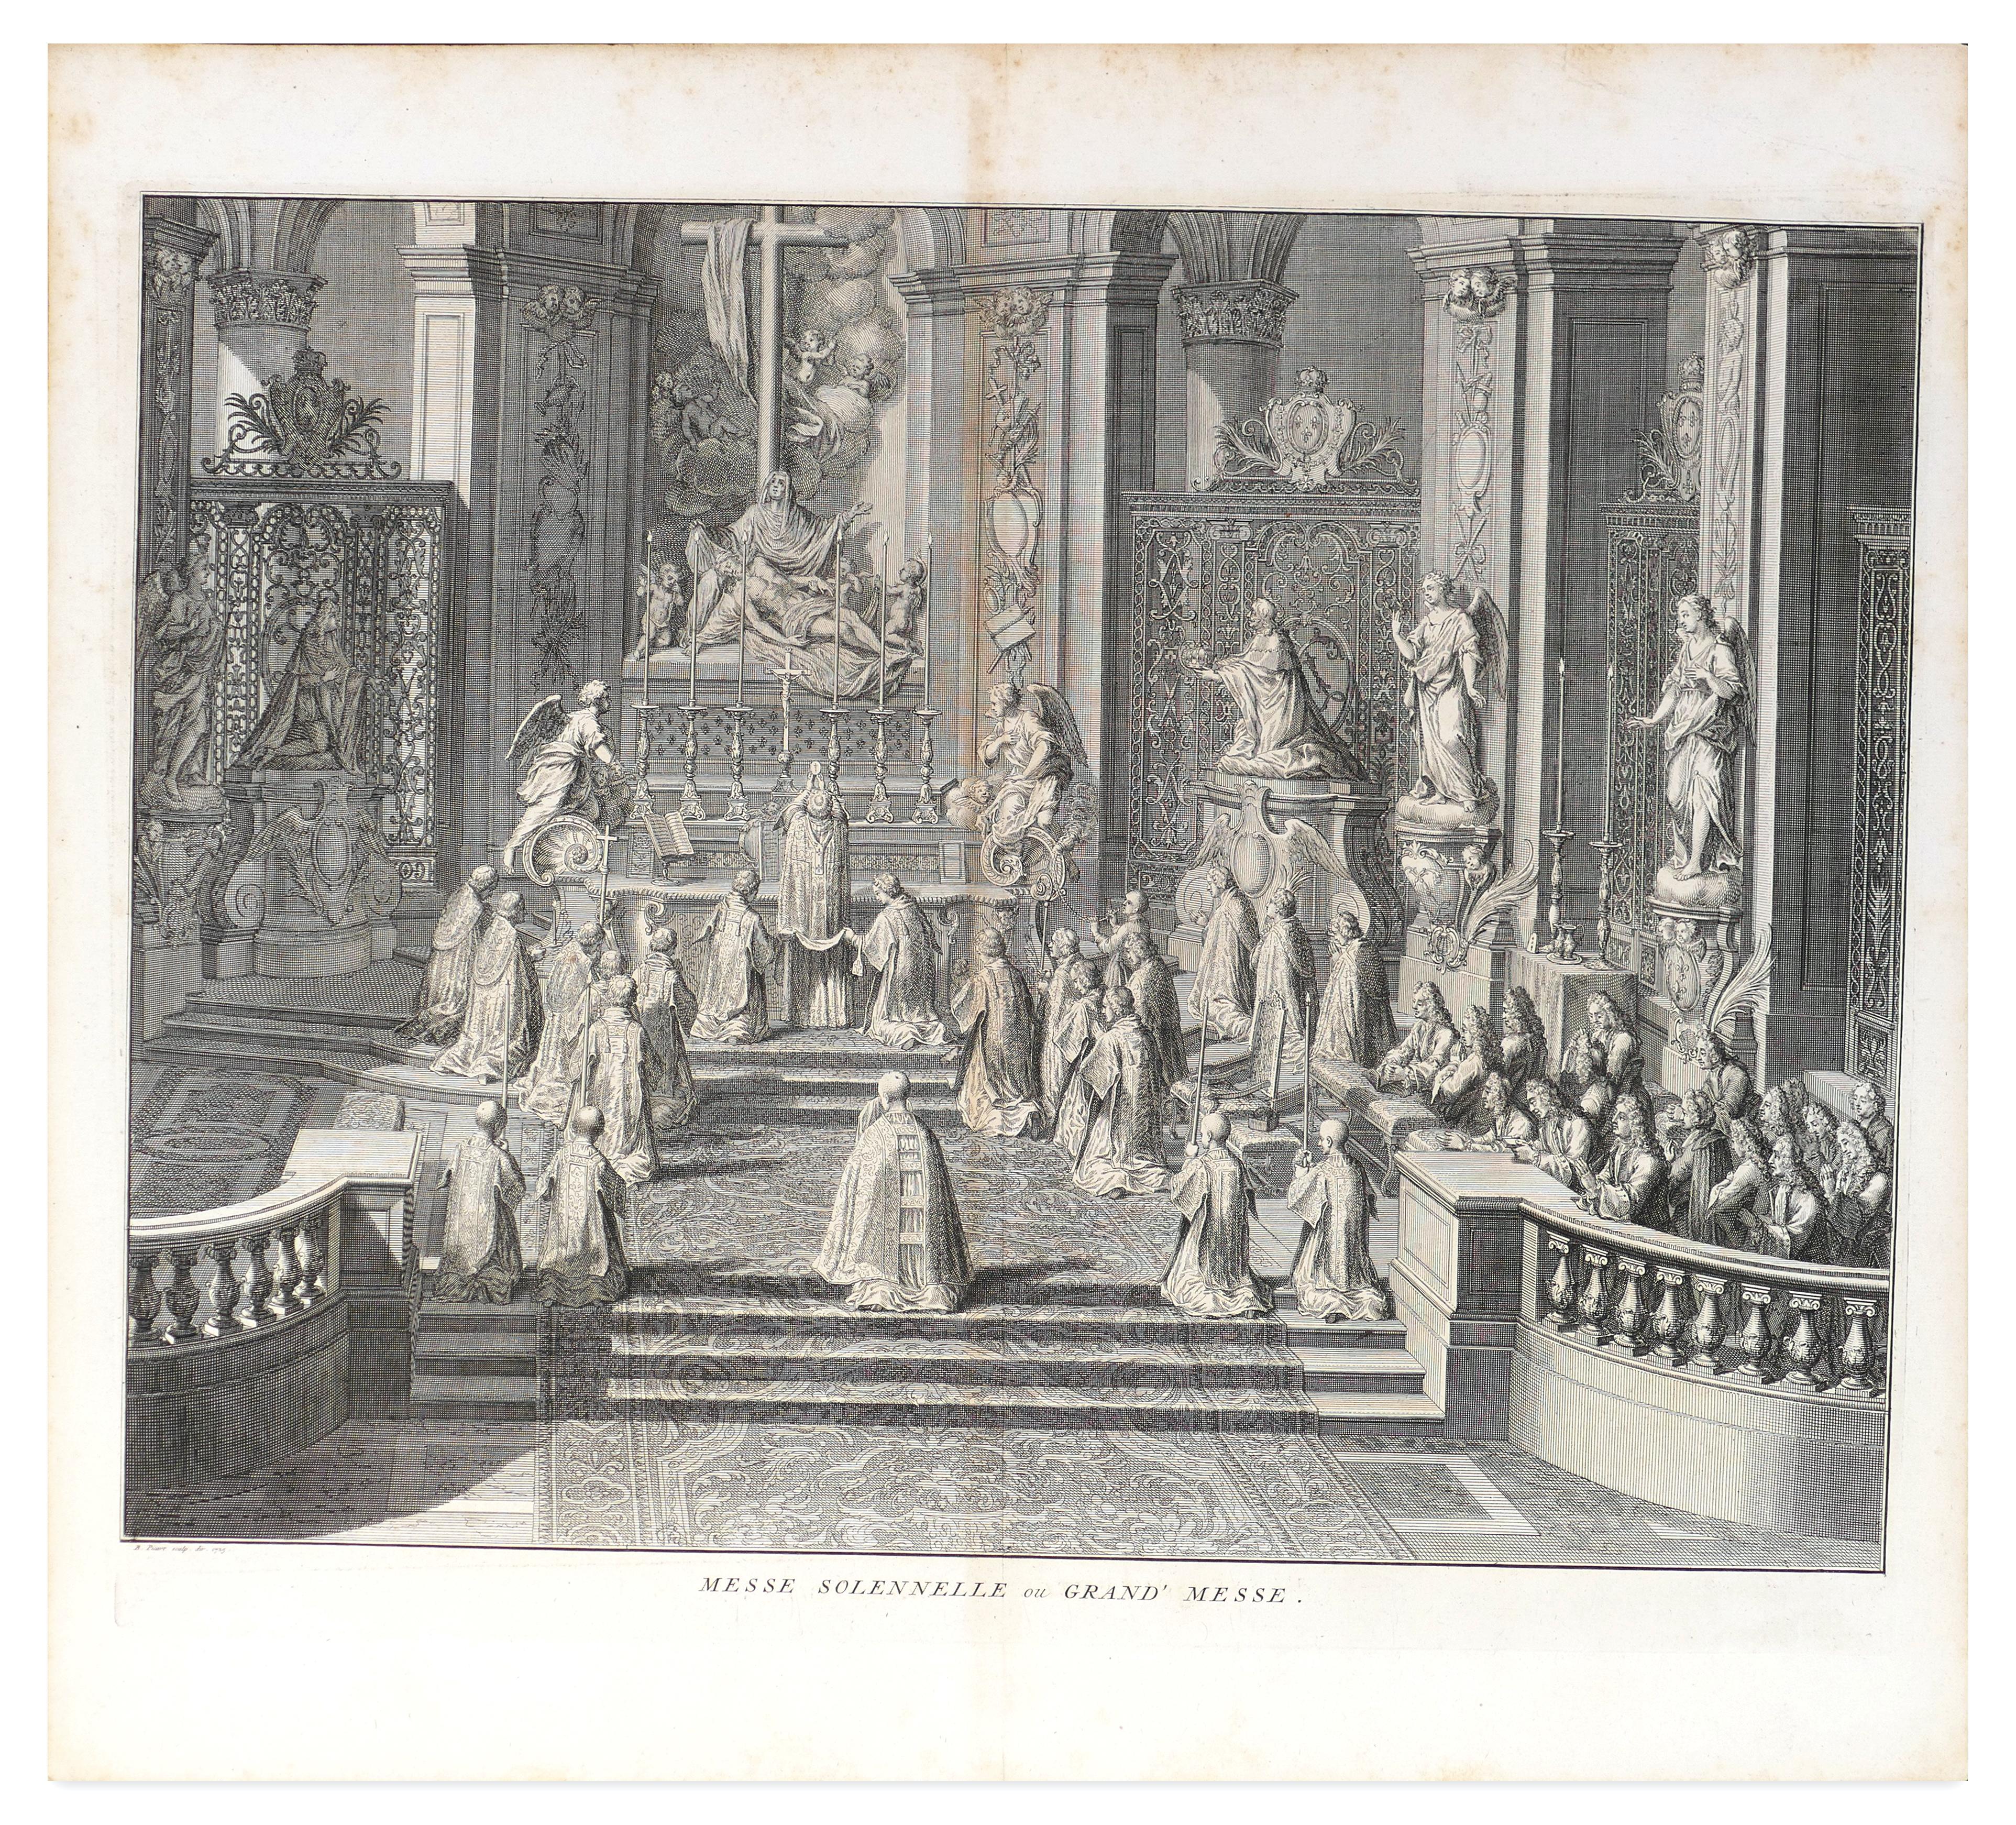 Bernard Picart Figurative Print - Messe Solennelle - Original Etching by by B. Picart - 1725